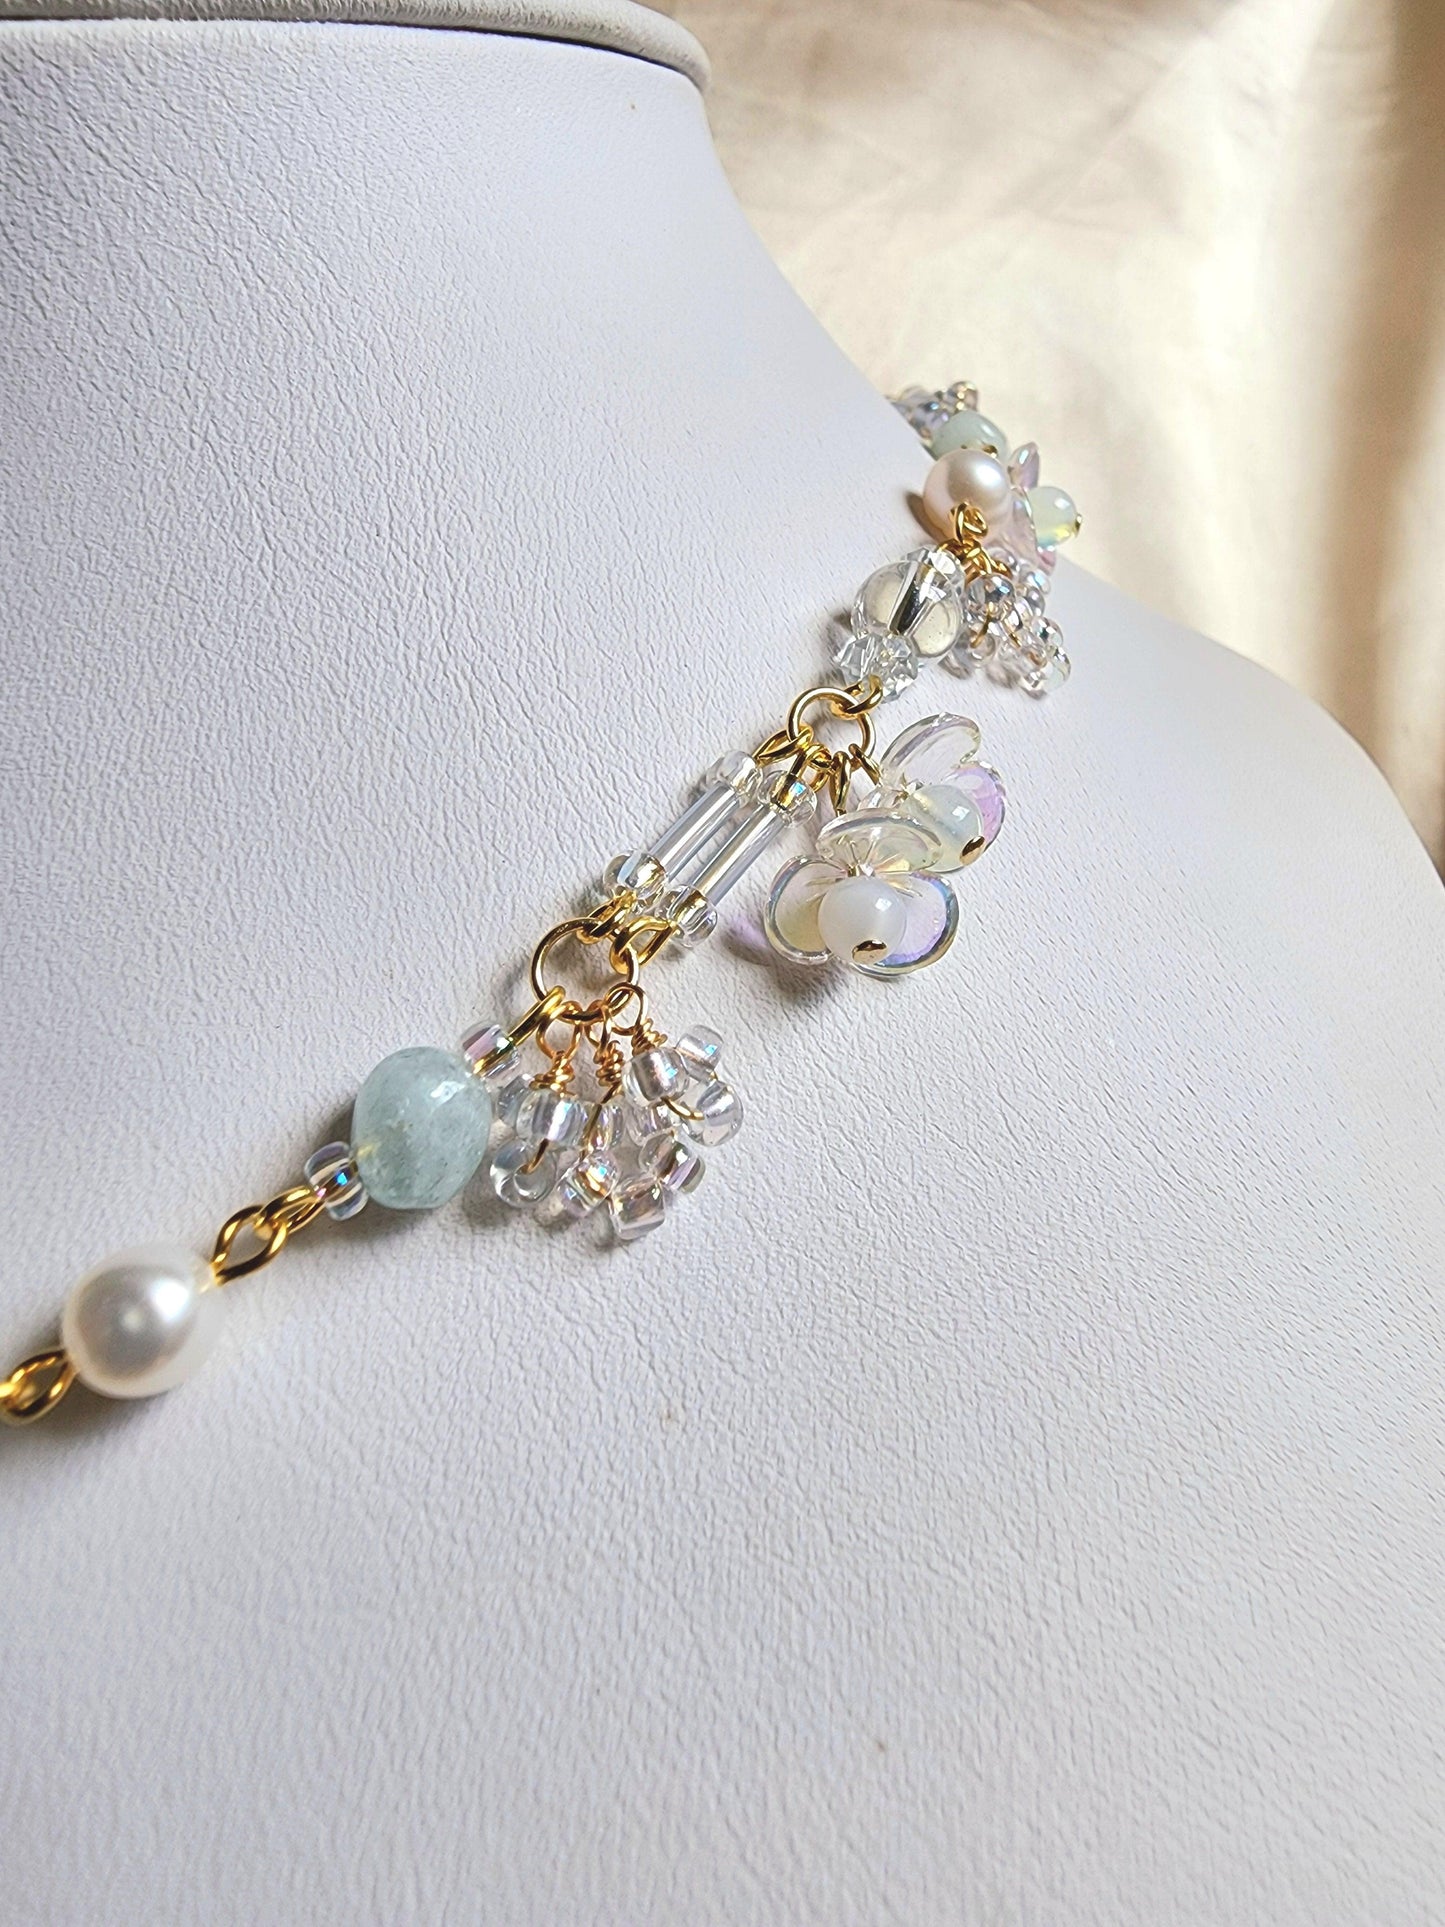 This handcrafted choker is composed of opalite, baby blue bugle beads, freshwater pearls, acrylic flower beads, seed beads, and gold-plated findings for an ethereal, soft, and detailed finish.